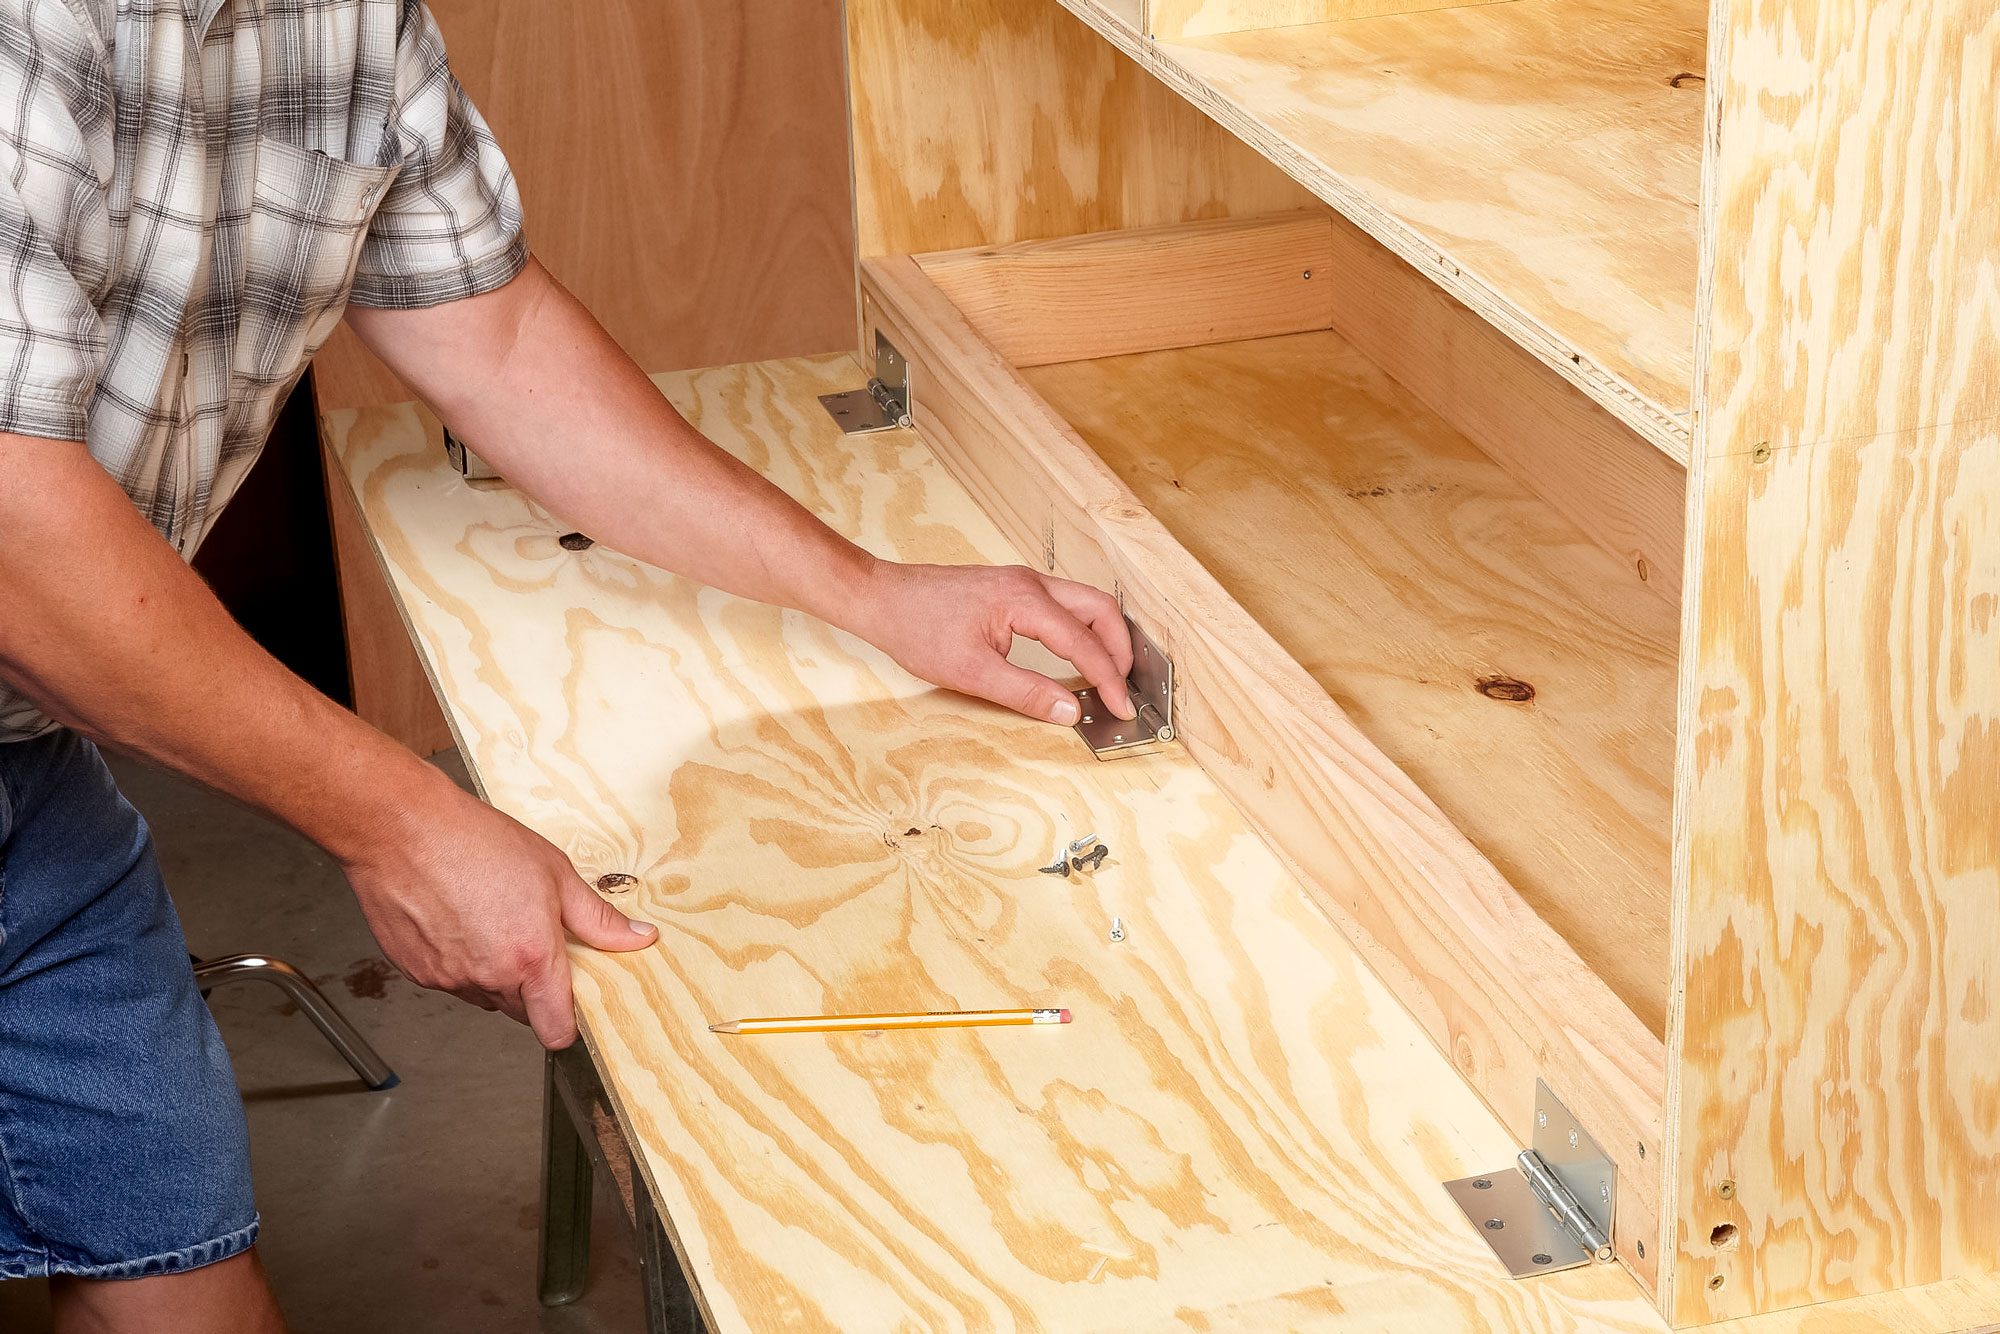 https://www.familyhandyman.com/wp-content/uploads/2019/06/FHM-How-To-Build-a-Workbench-for-Small-Spaces-FH12NOV_533_55_058_KSedit.jpg?fit=640%2C427